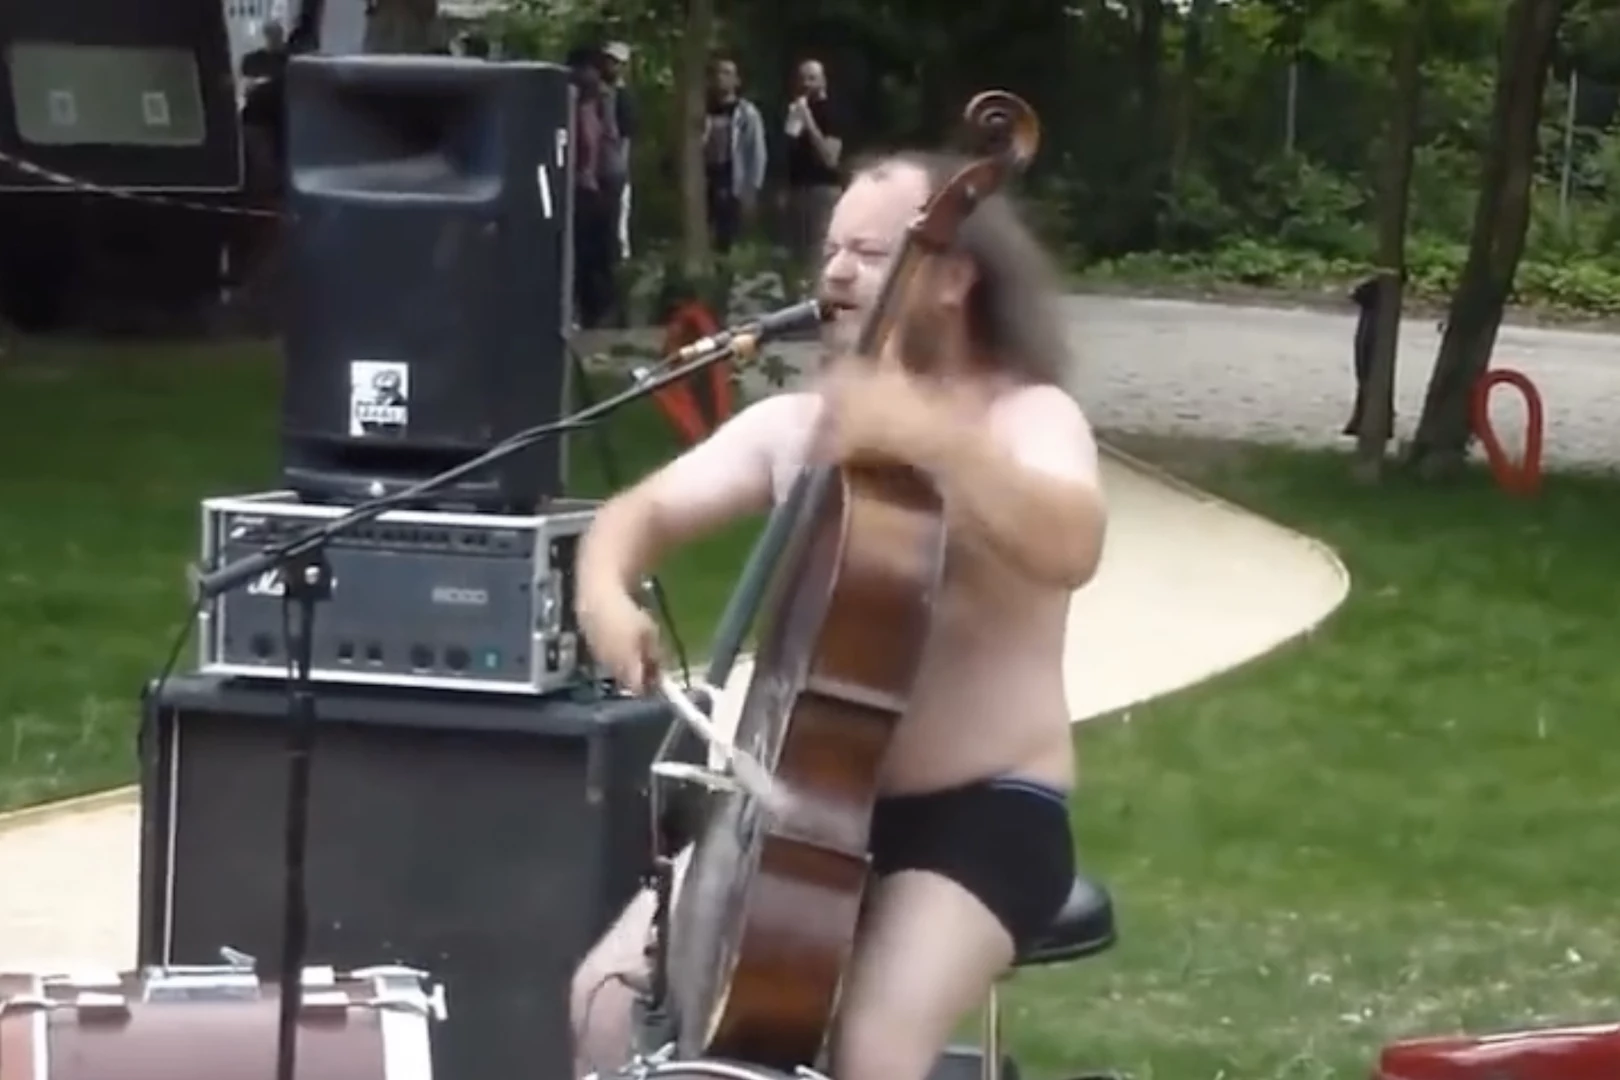 Man in Underwear Plays Death Metal Cello in a Park, Gets Tips photo